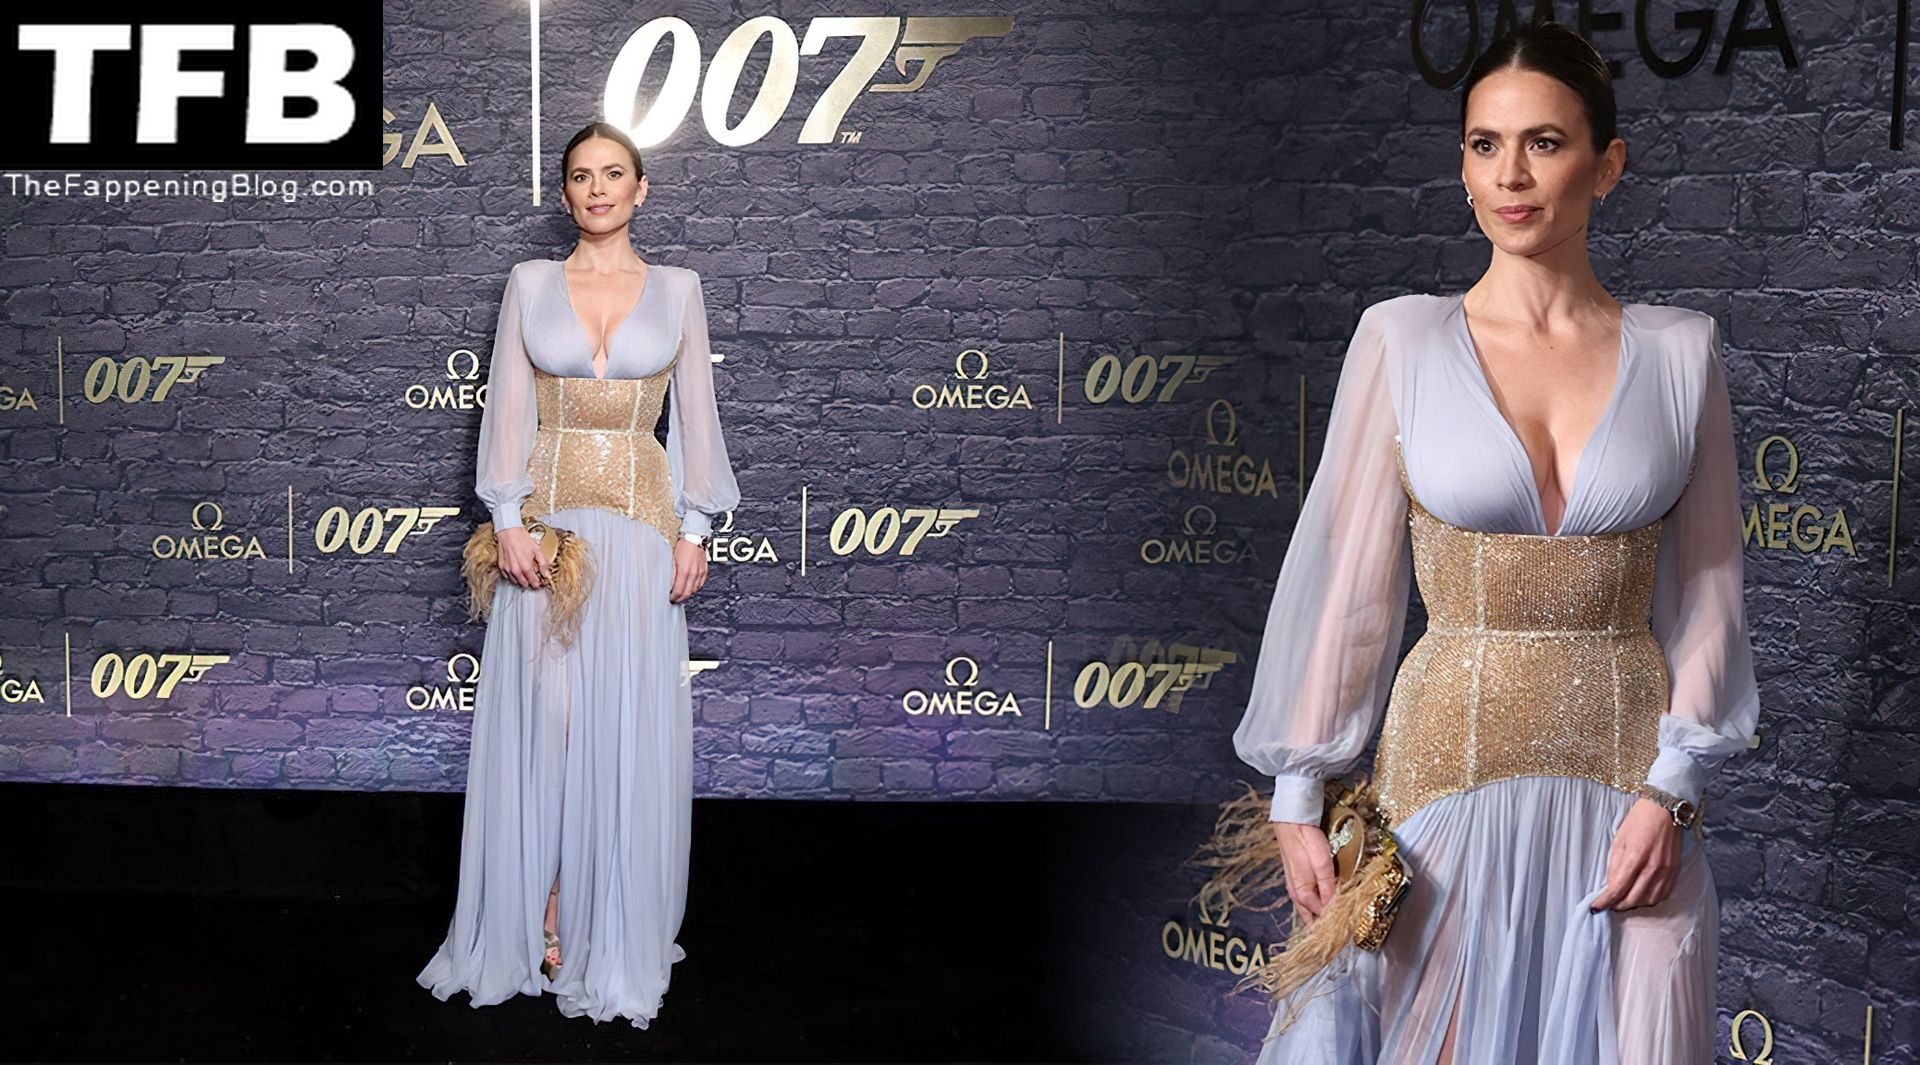 Hayley Atwell Displays Her Famous Cleavage at the “60 Years of James Bond” Photocall (40 Photos)